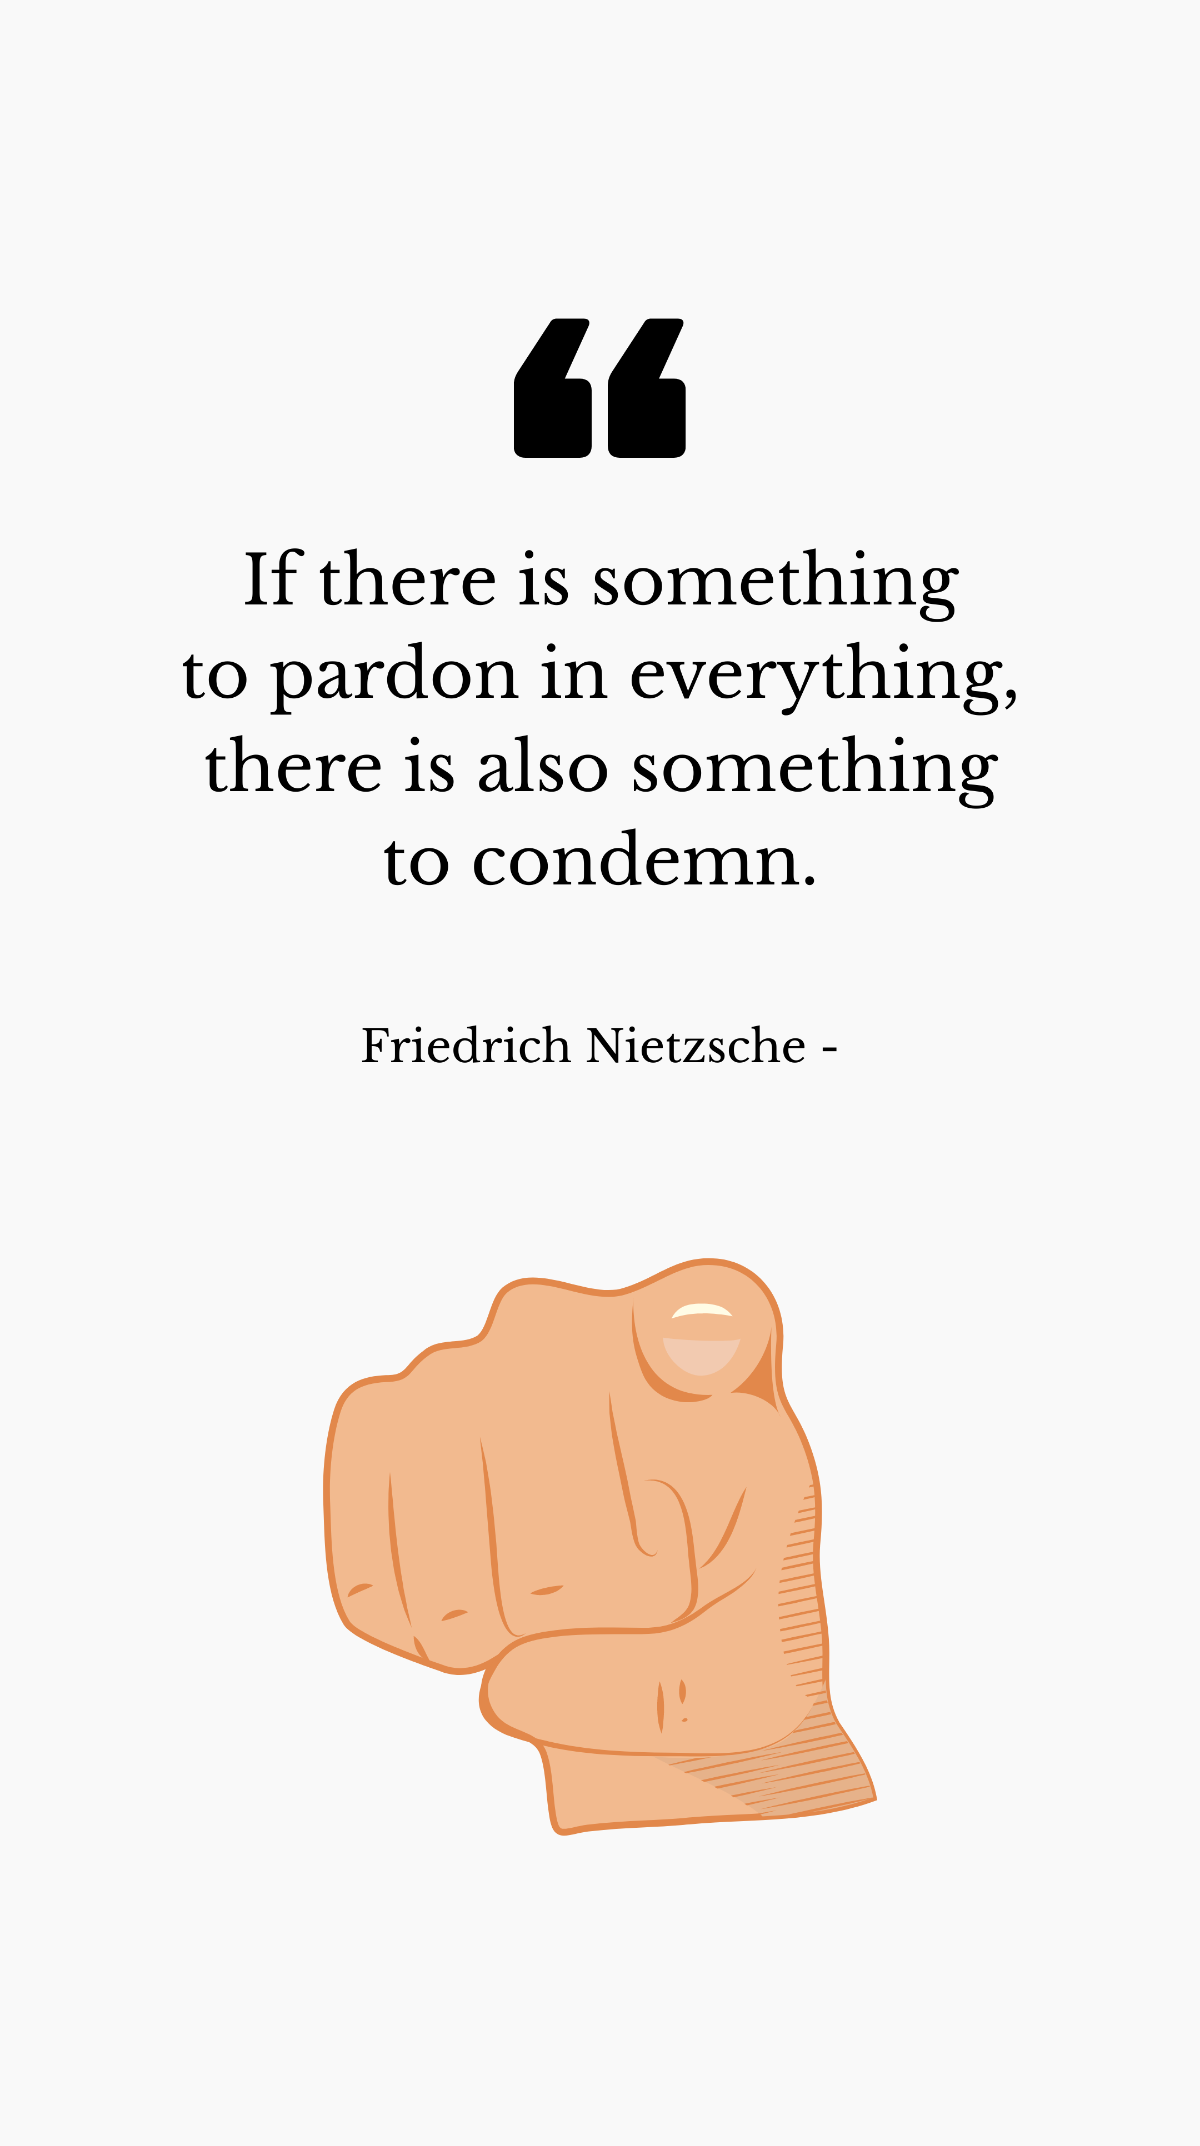 Friedrich Nietzsche - If there is something to pardon in everything, there is also something to condemn. Template